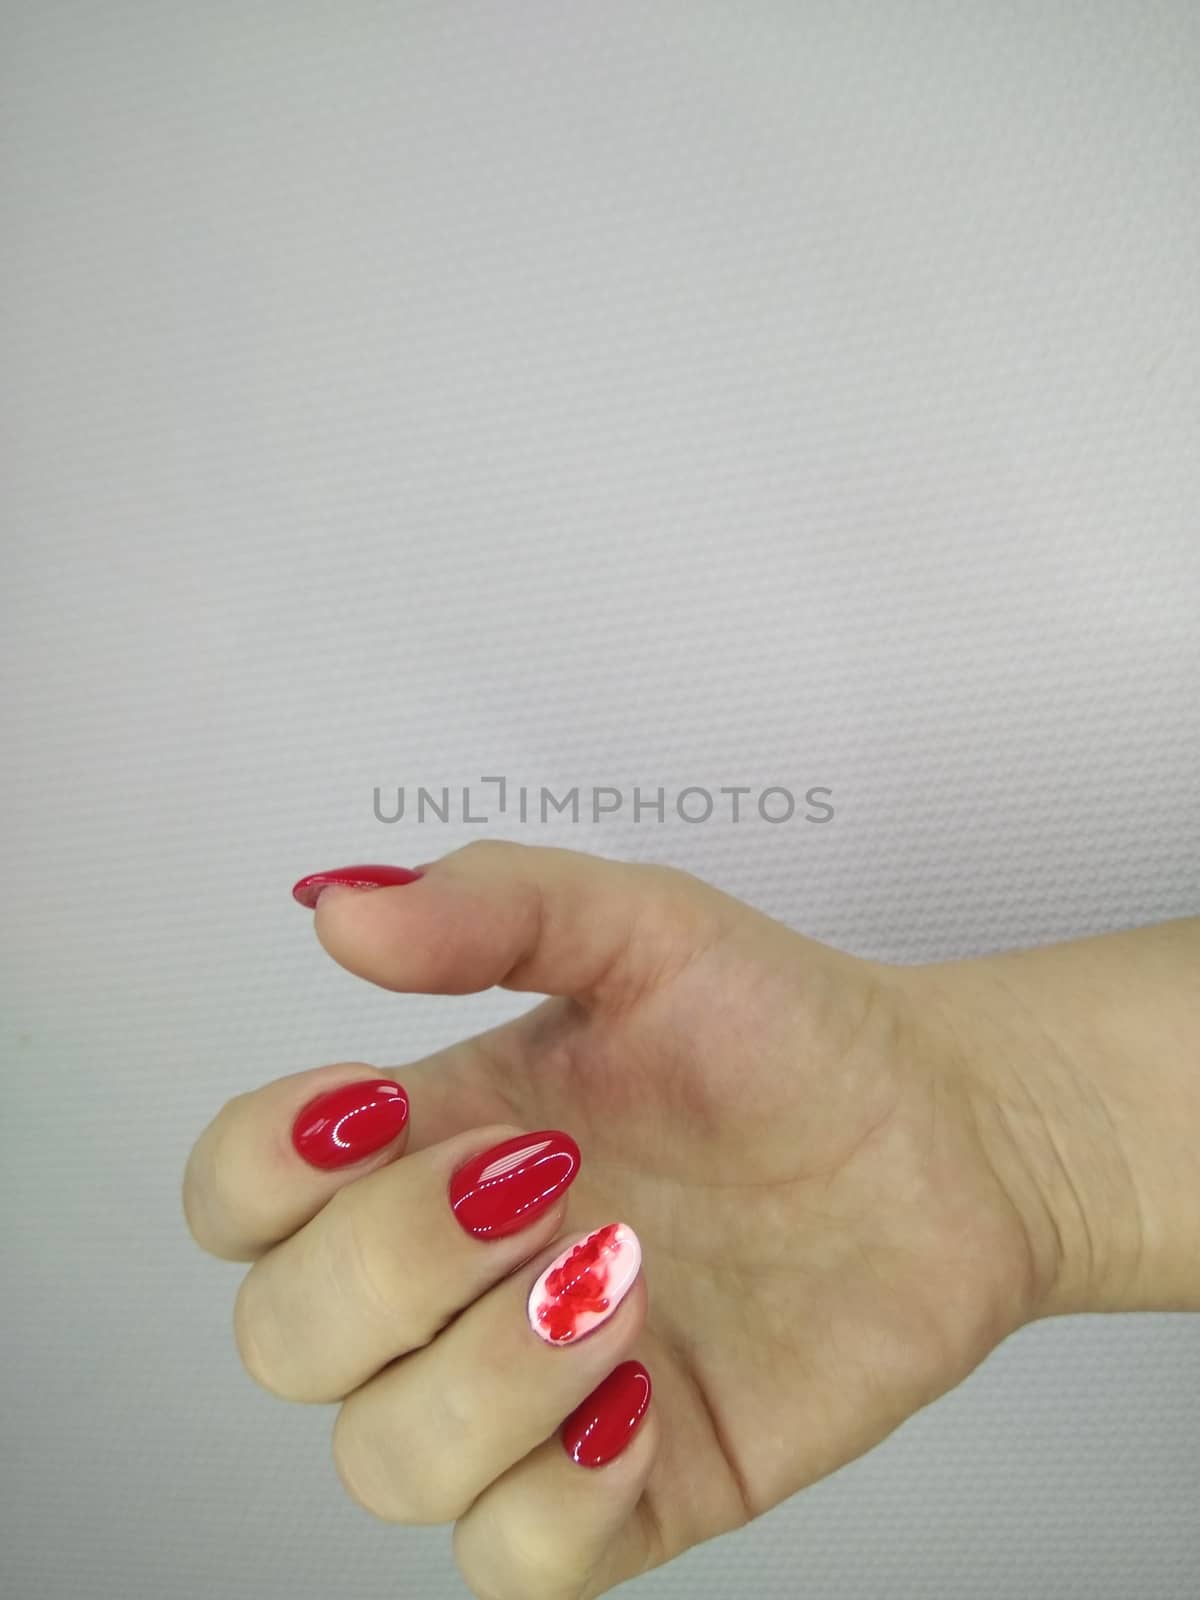 Amazing natural nails. Women's hands with clean manicure. Gel polish applied. by SmirMaxStock